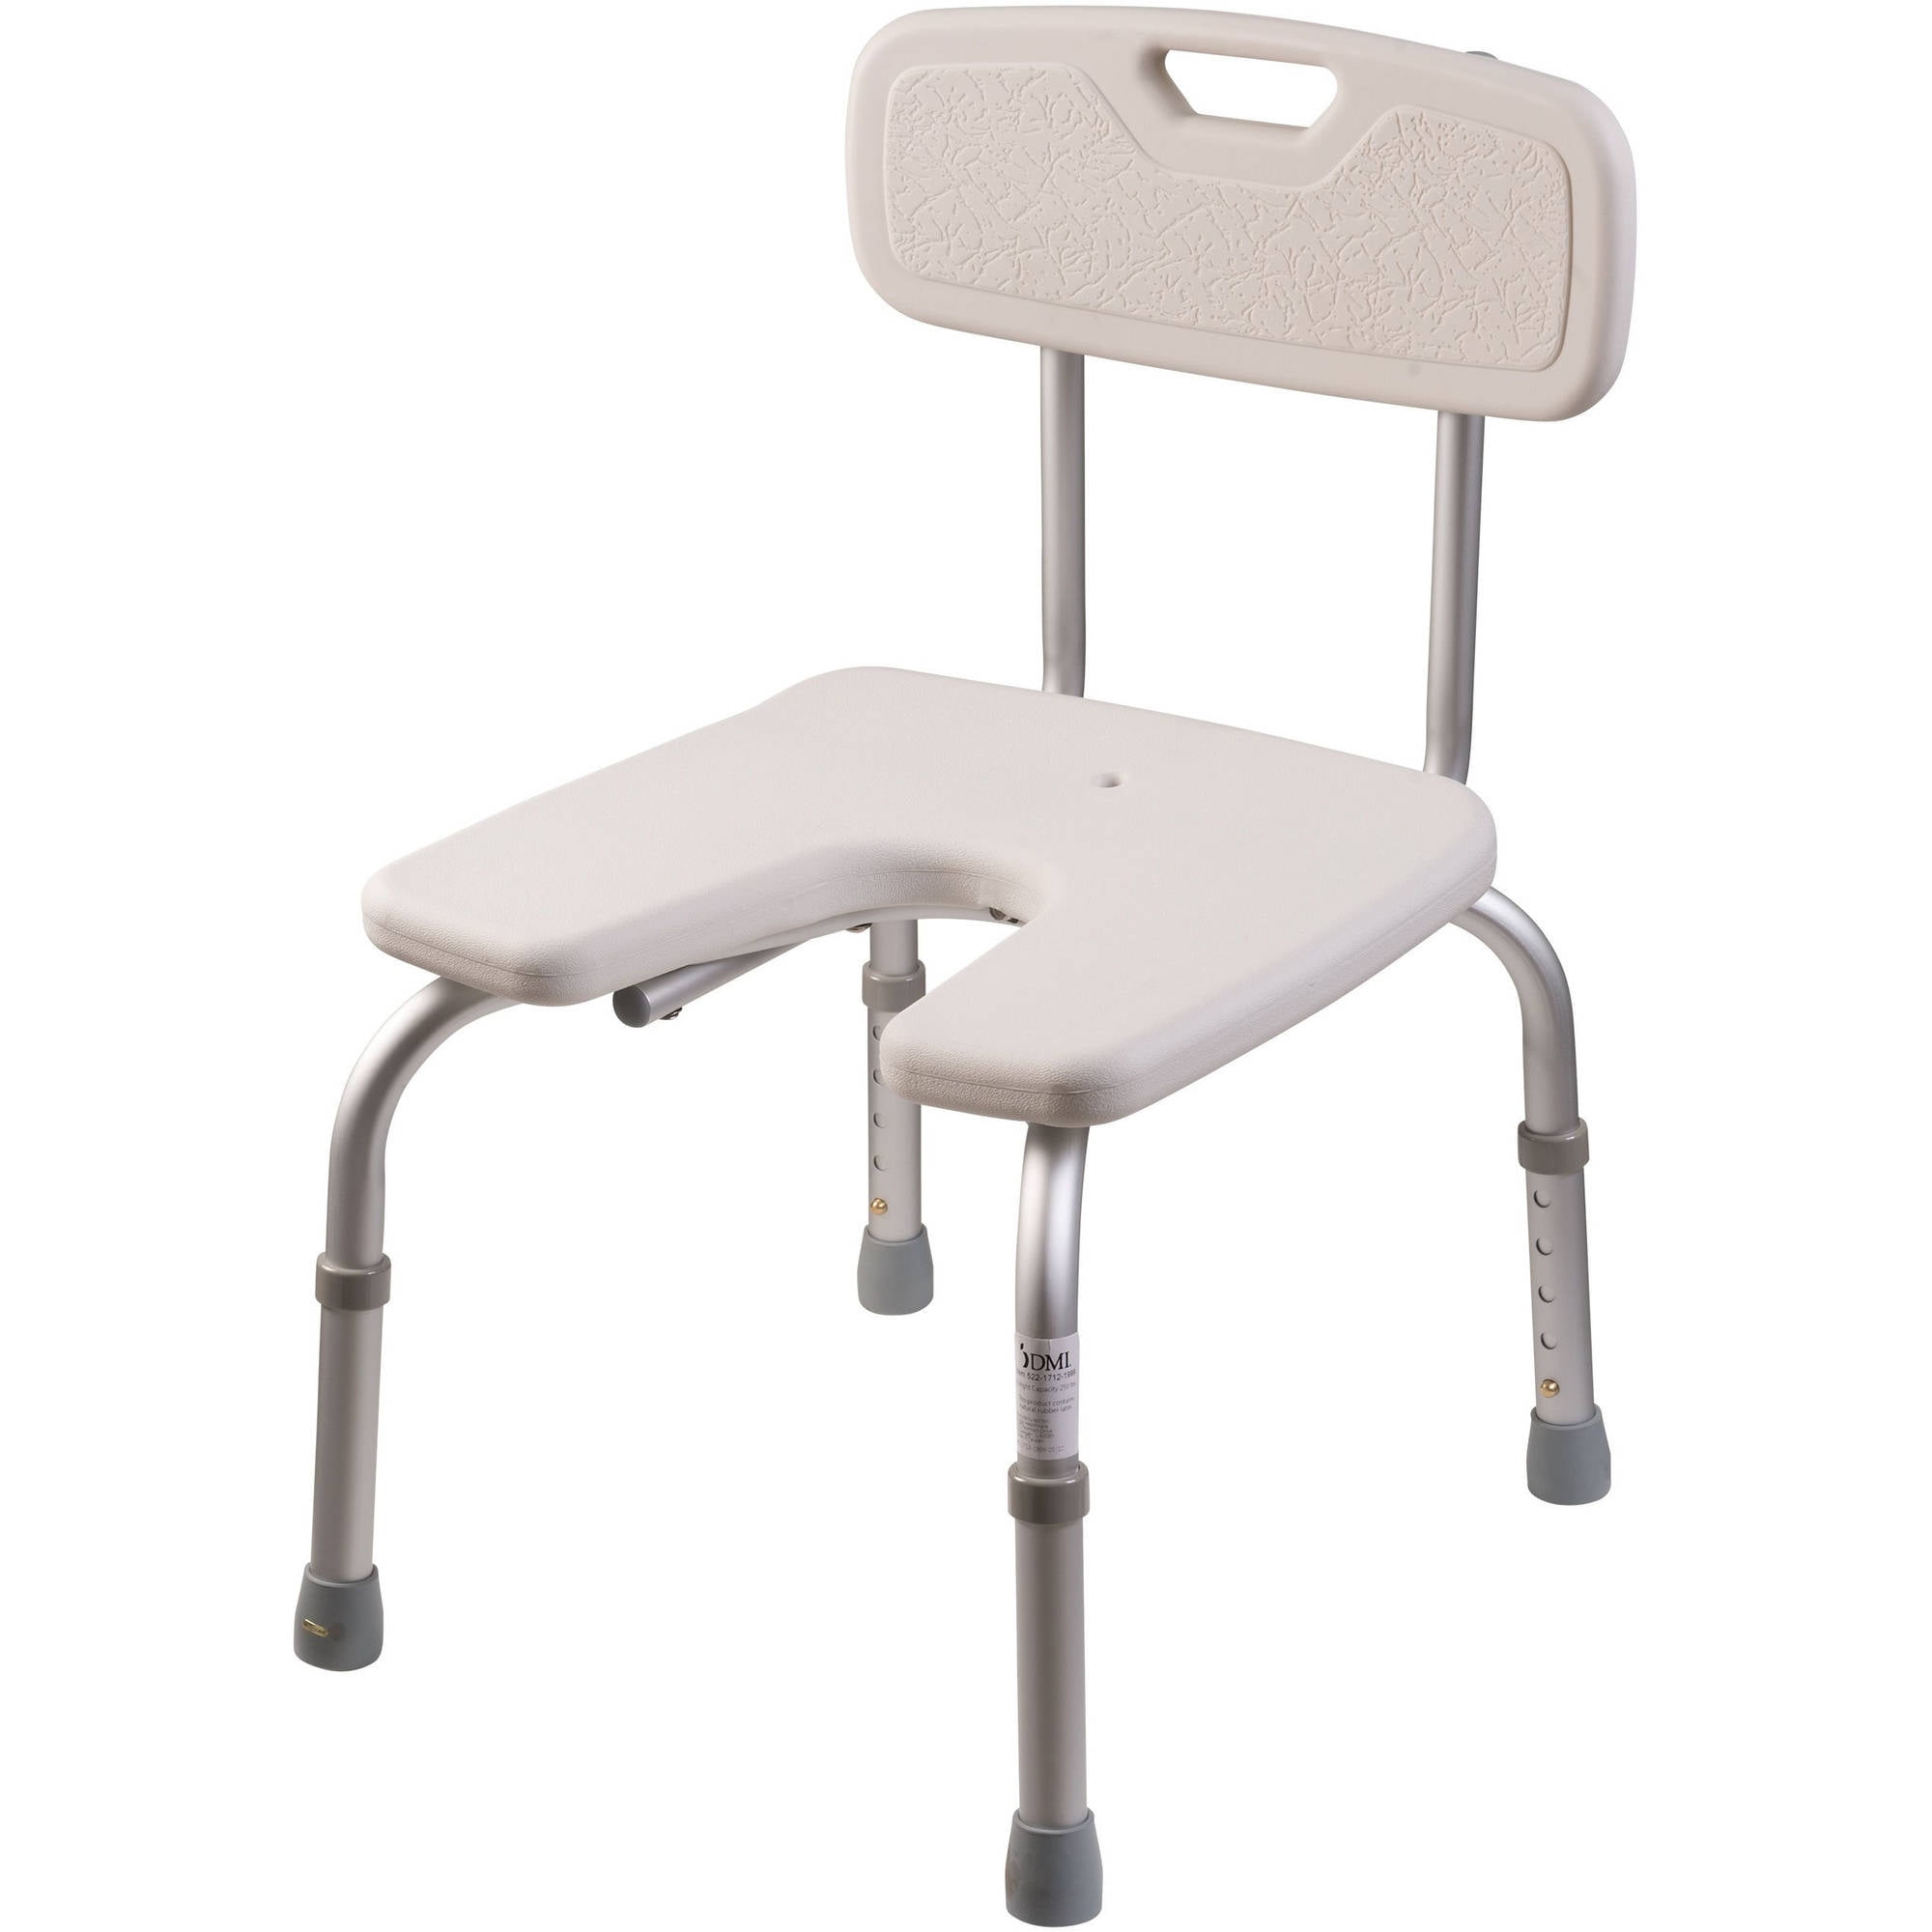 Dmi Shower Chair With Removable Back, Bathtub Seats For Seniors